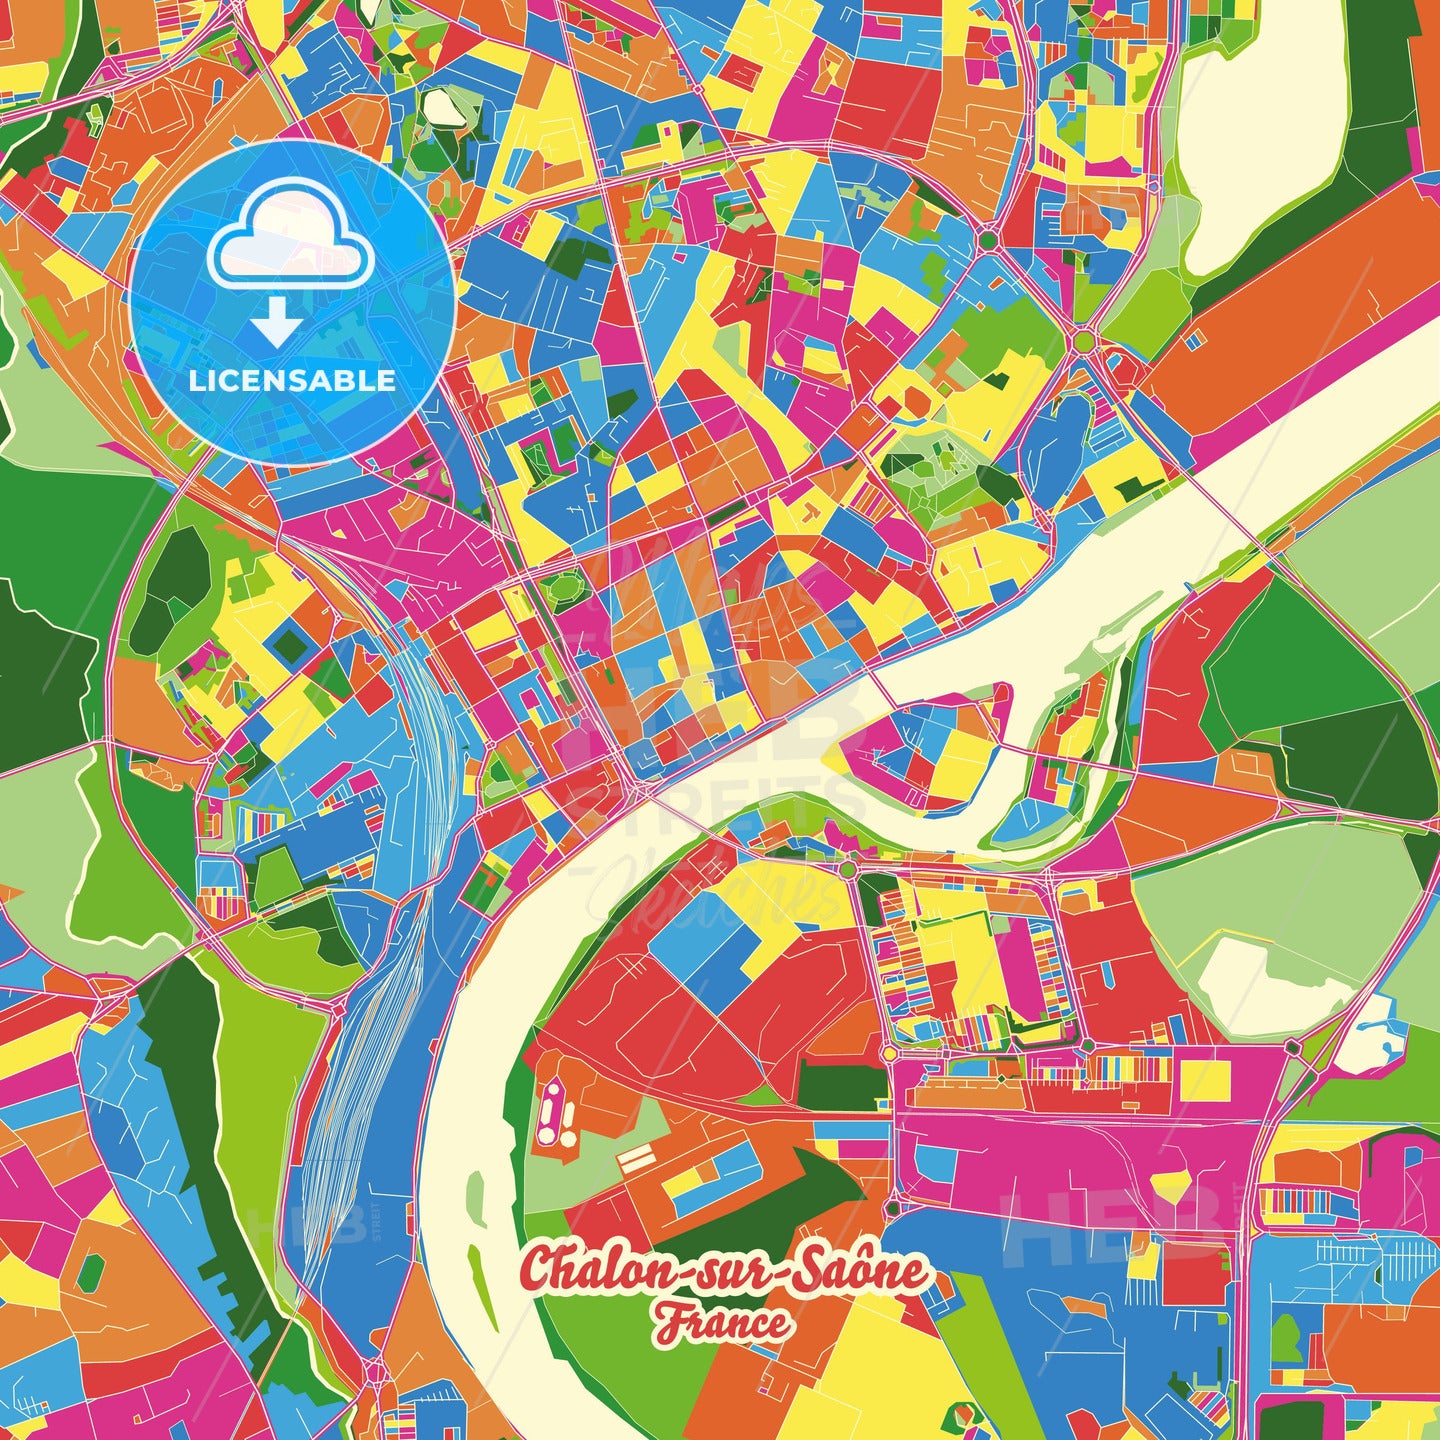 Chalon-sur-Saône, France Crazy Colorful Street Map Poster Template - HEBSTREITS Sketches